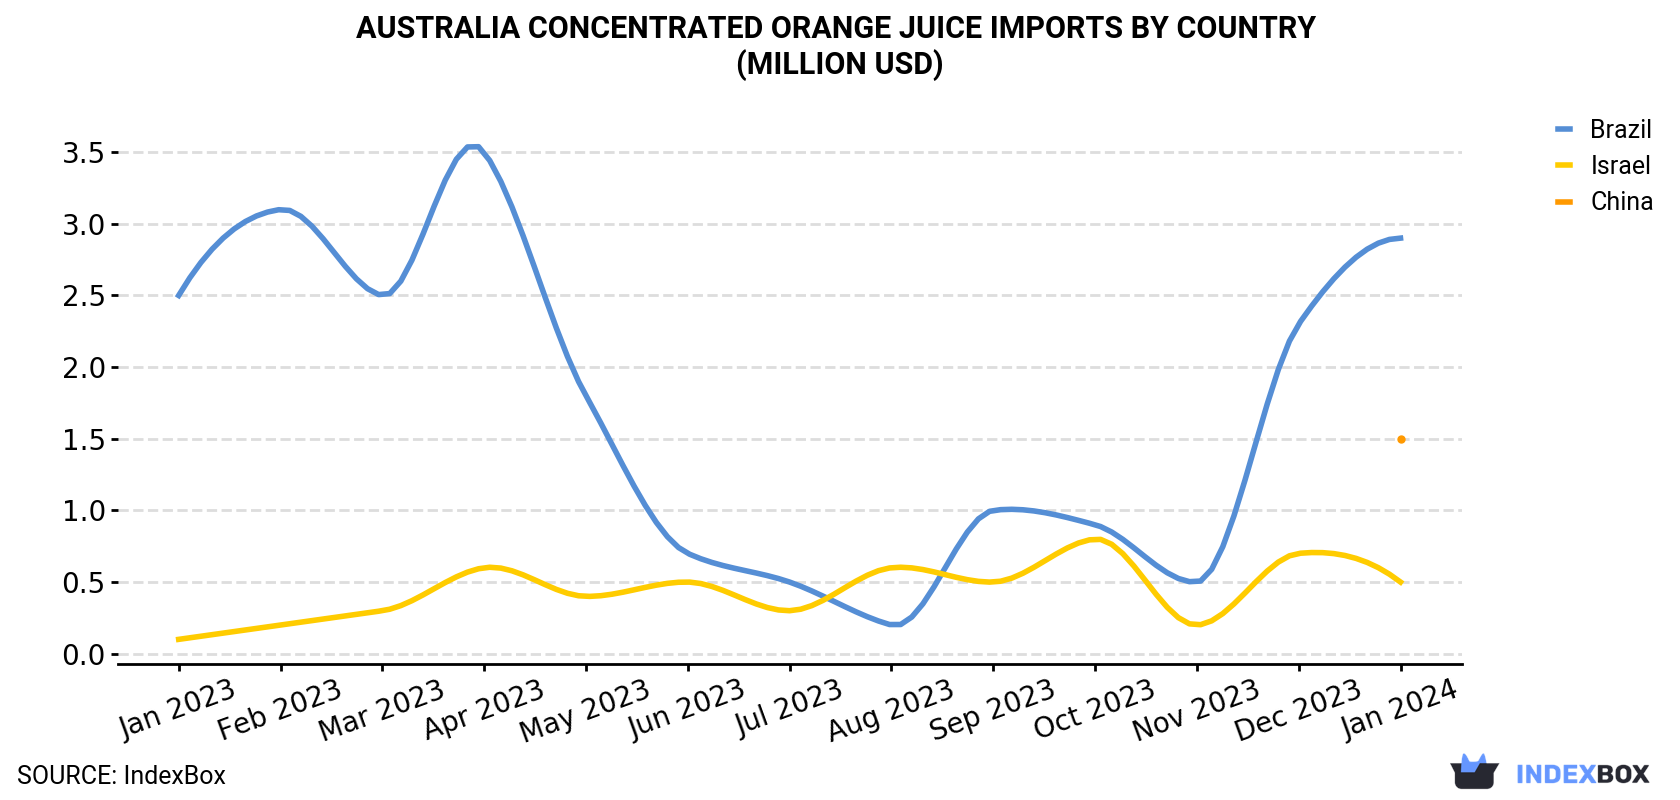 Australia Concentrated Orange Juice Imports By Country (Million USD)